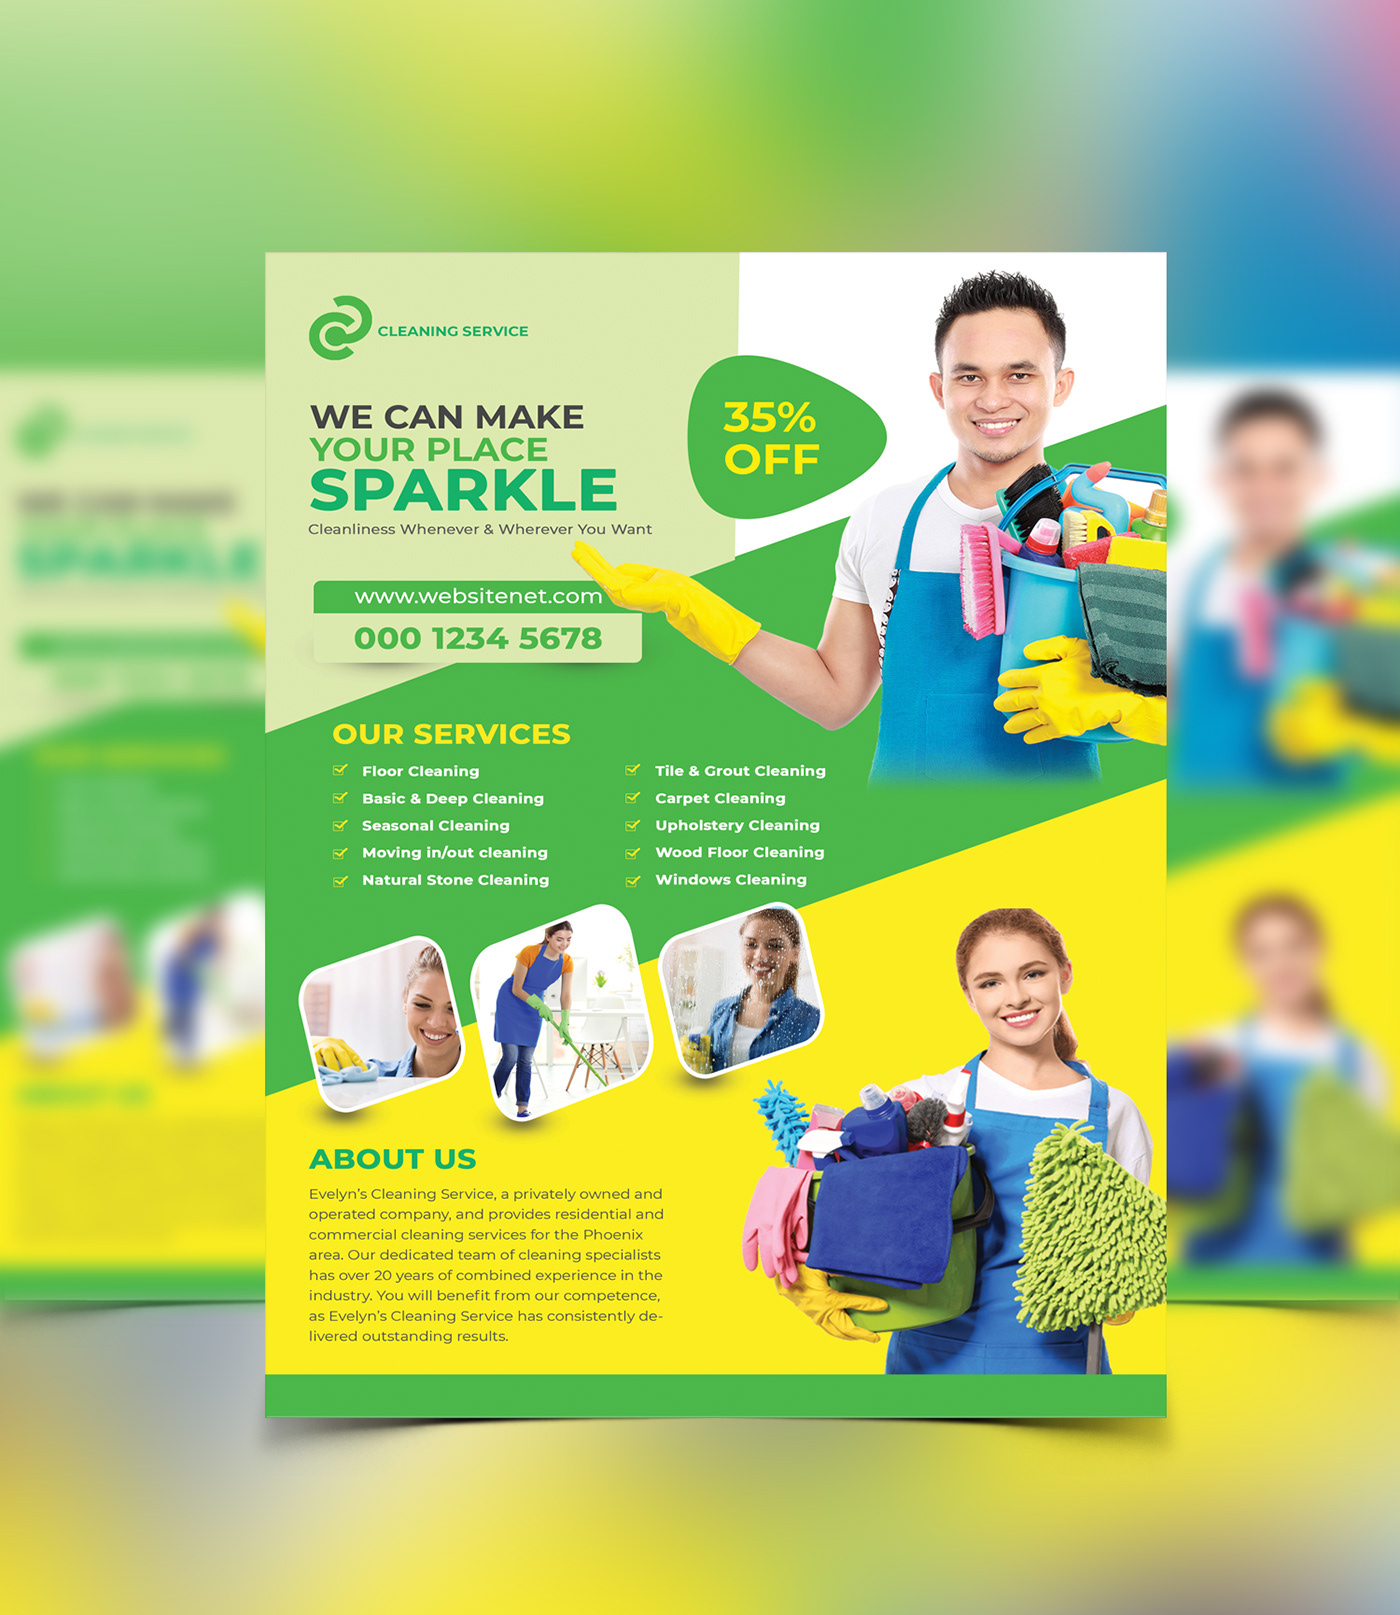 Cleaning Services Flyer Template on Behance Intended For House Cleaning Services Flyer Templates